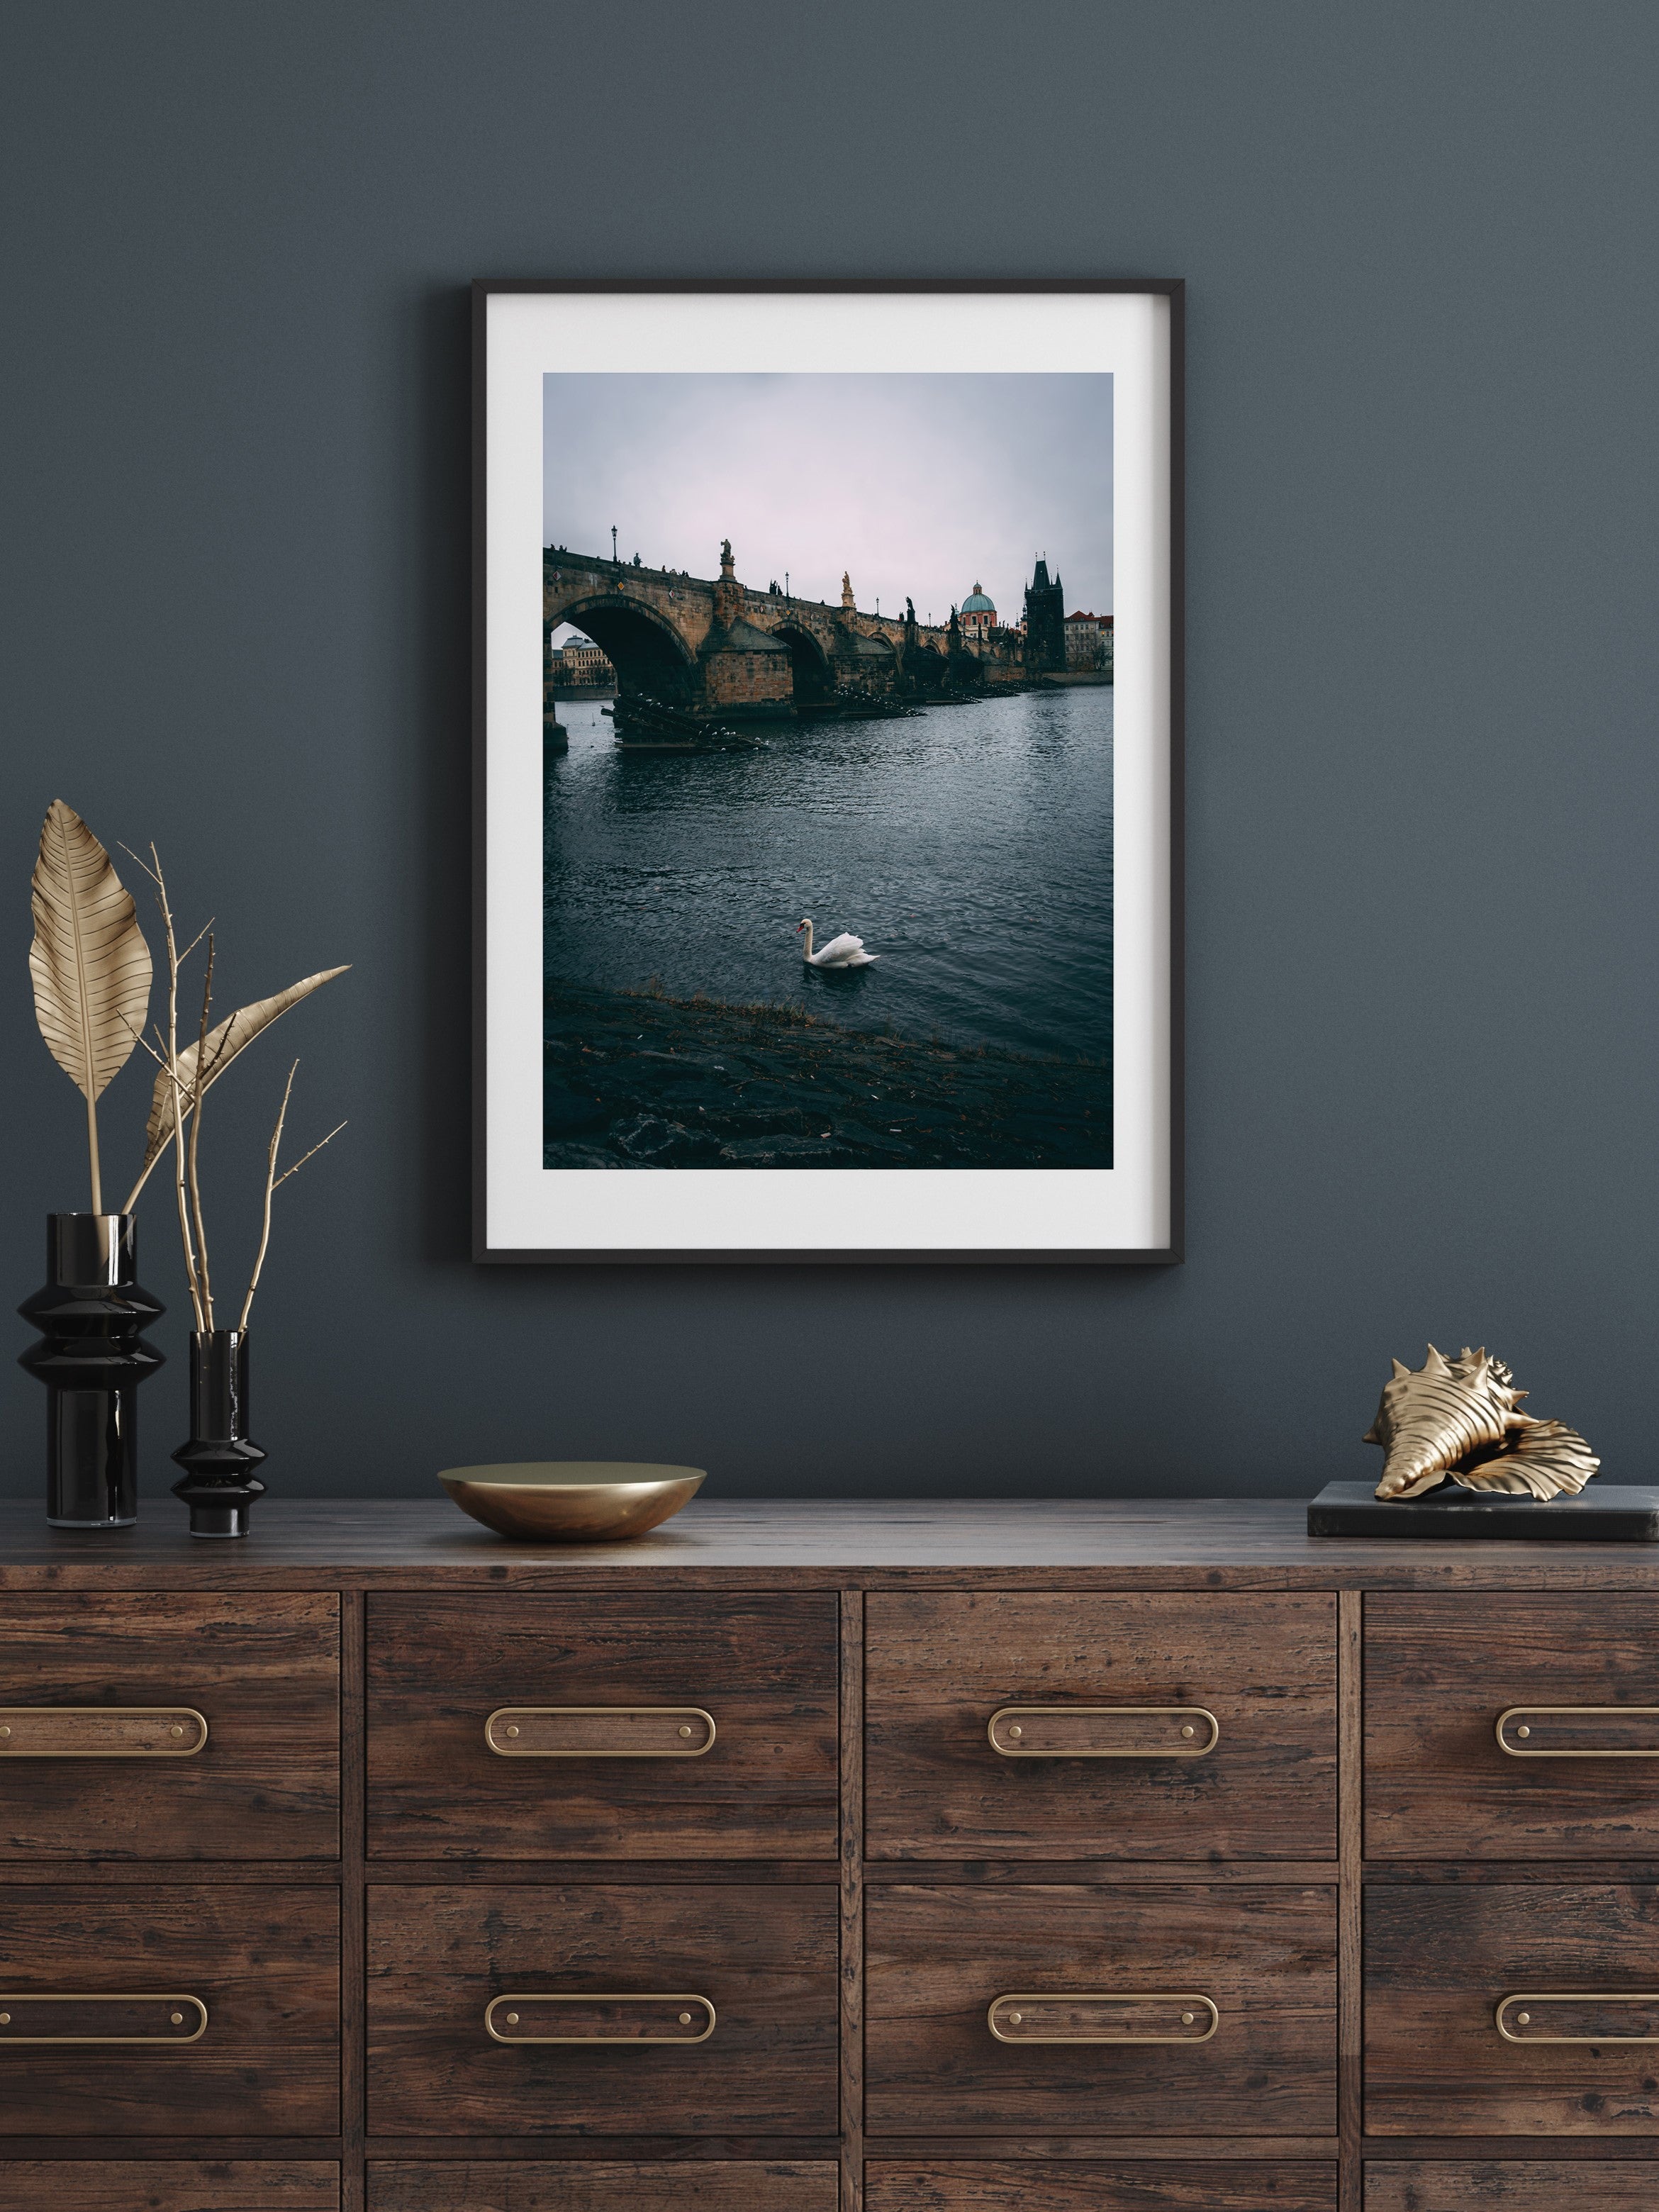 Glide with the Swan: The Majestic Charles Bridge of Prague | Poster